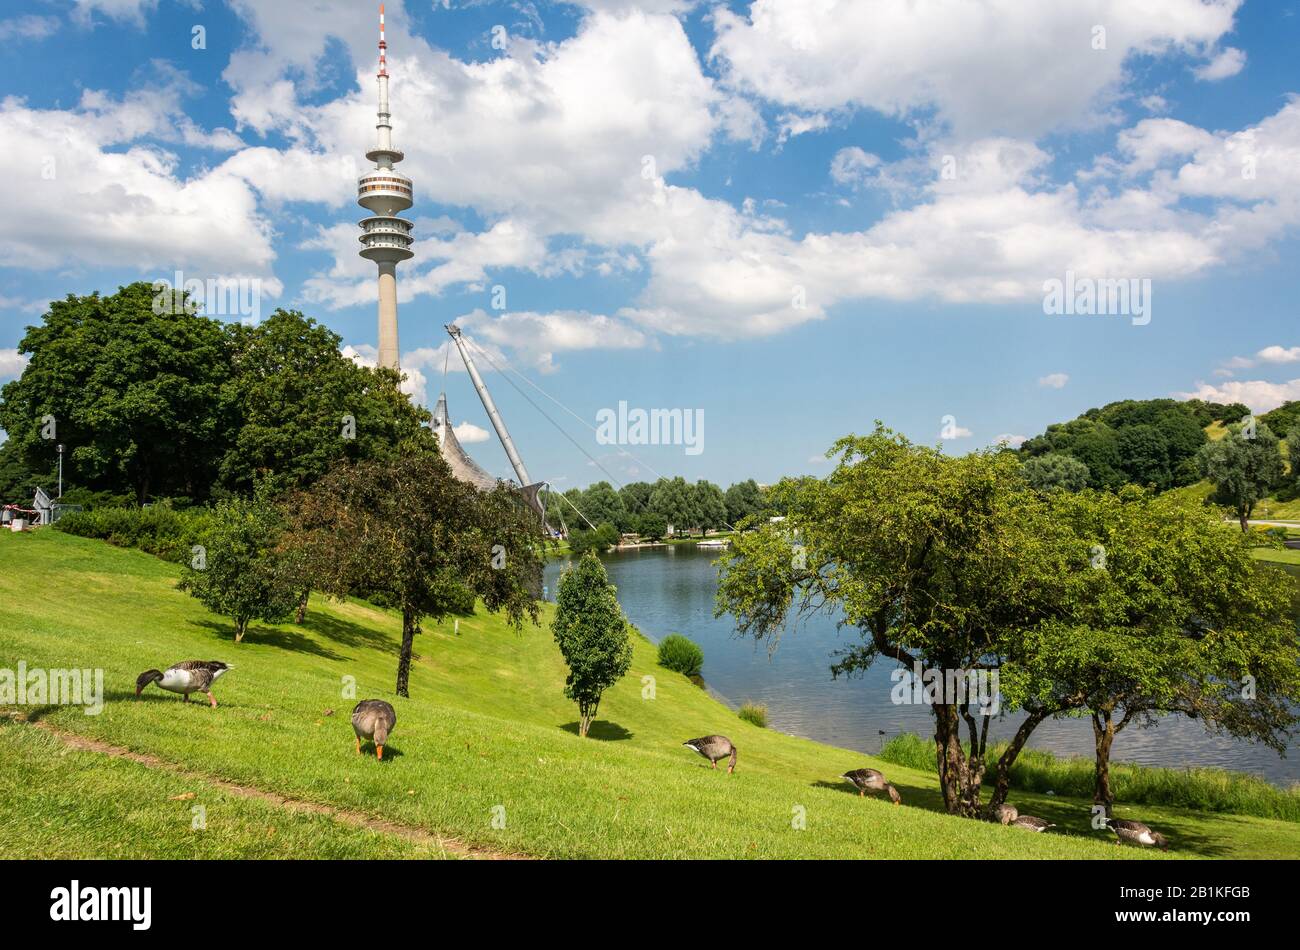 Munich, Germany – July 1, 2016. View of a grass lawn with a flock of geese in Olympiapark in Munich, Germany, with Olympic Tower (Olympiaturm) in the Stock Photo